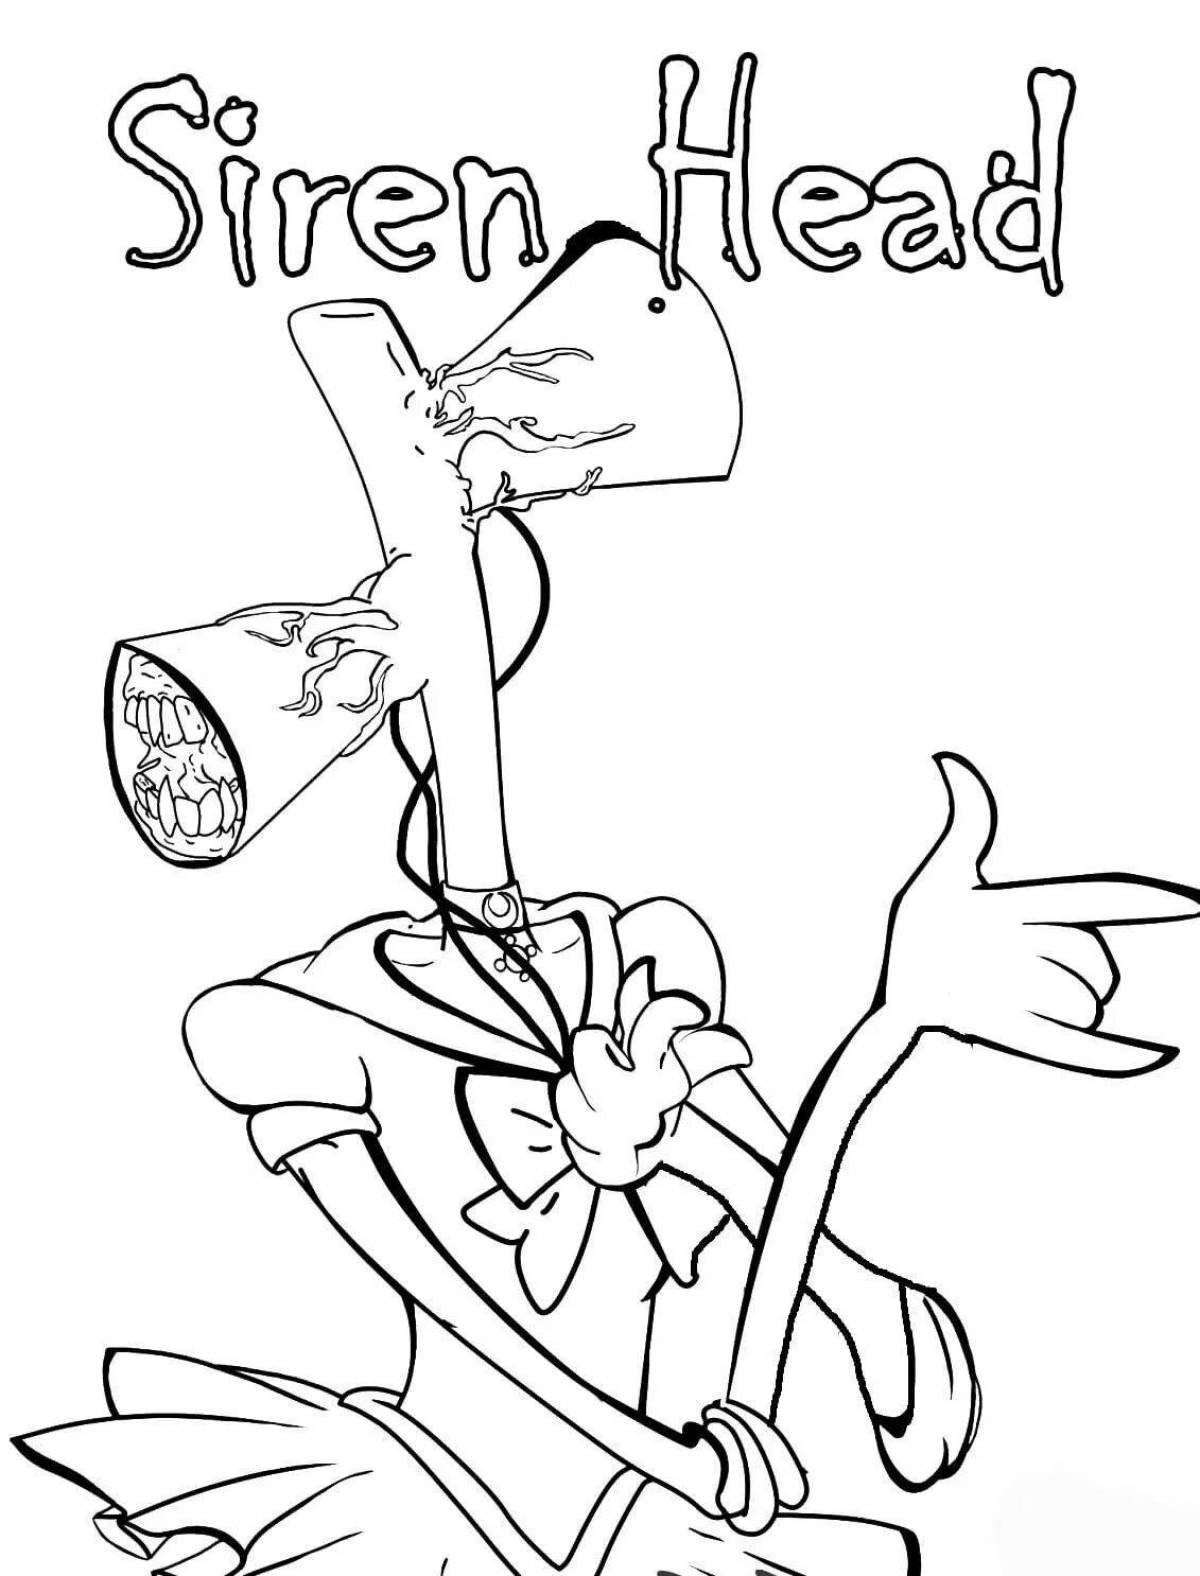 Cute sereno head coloring page for kids